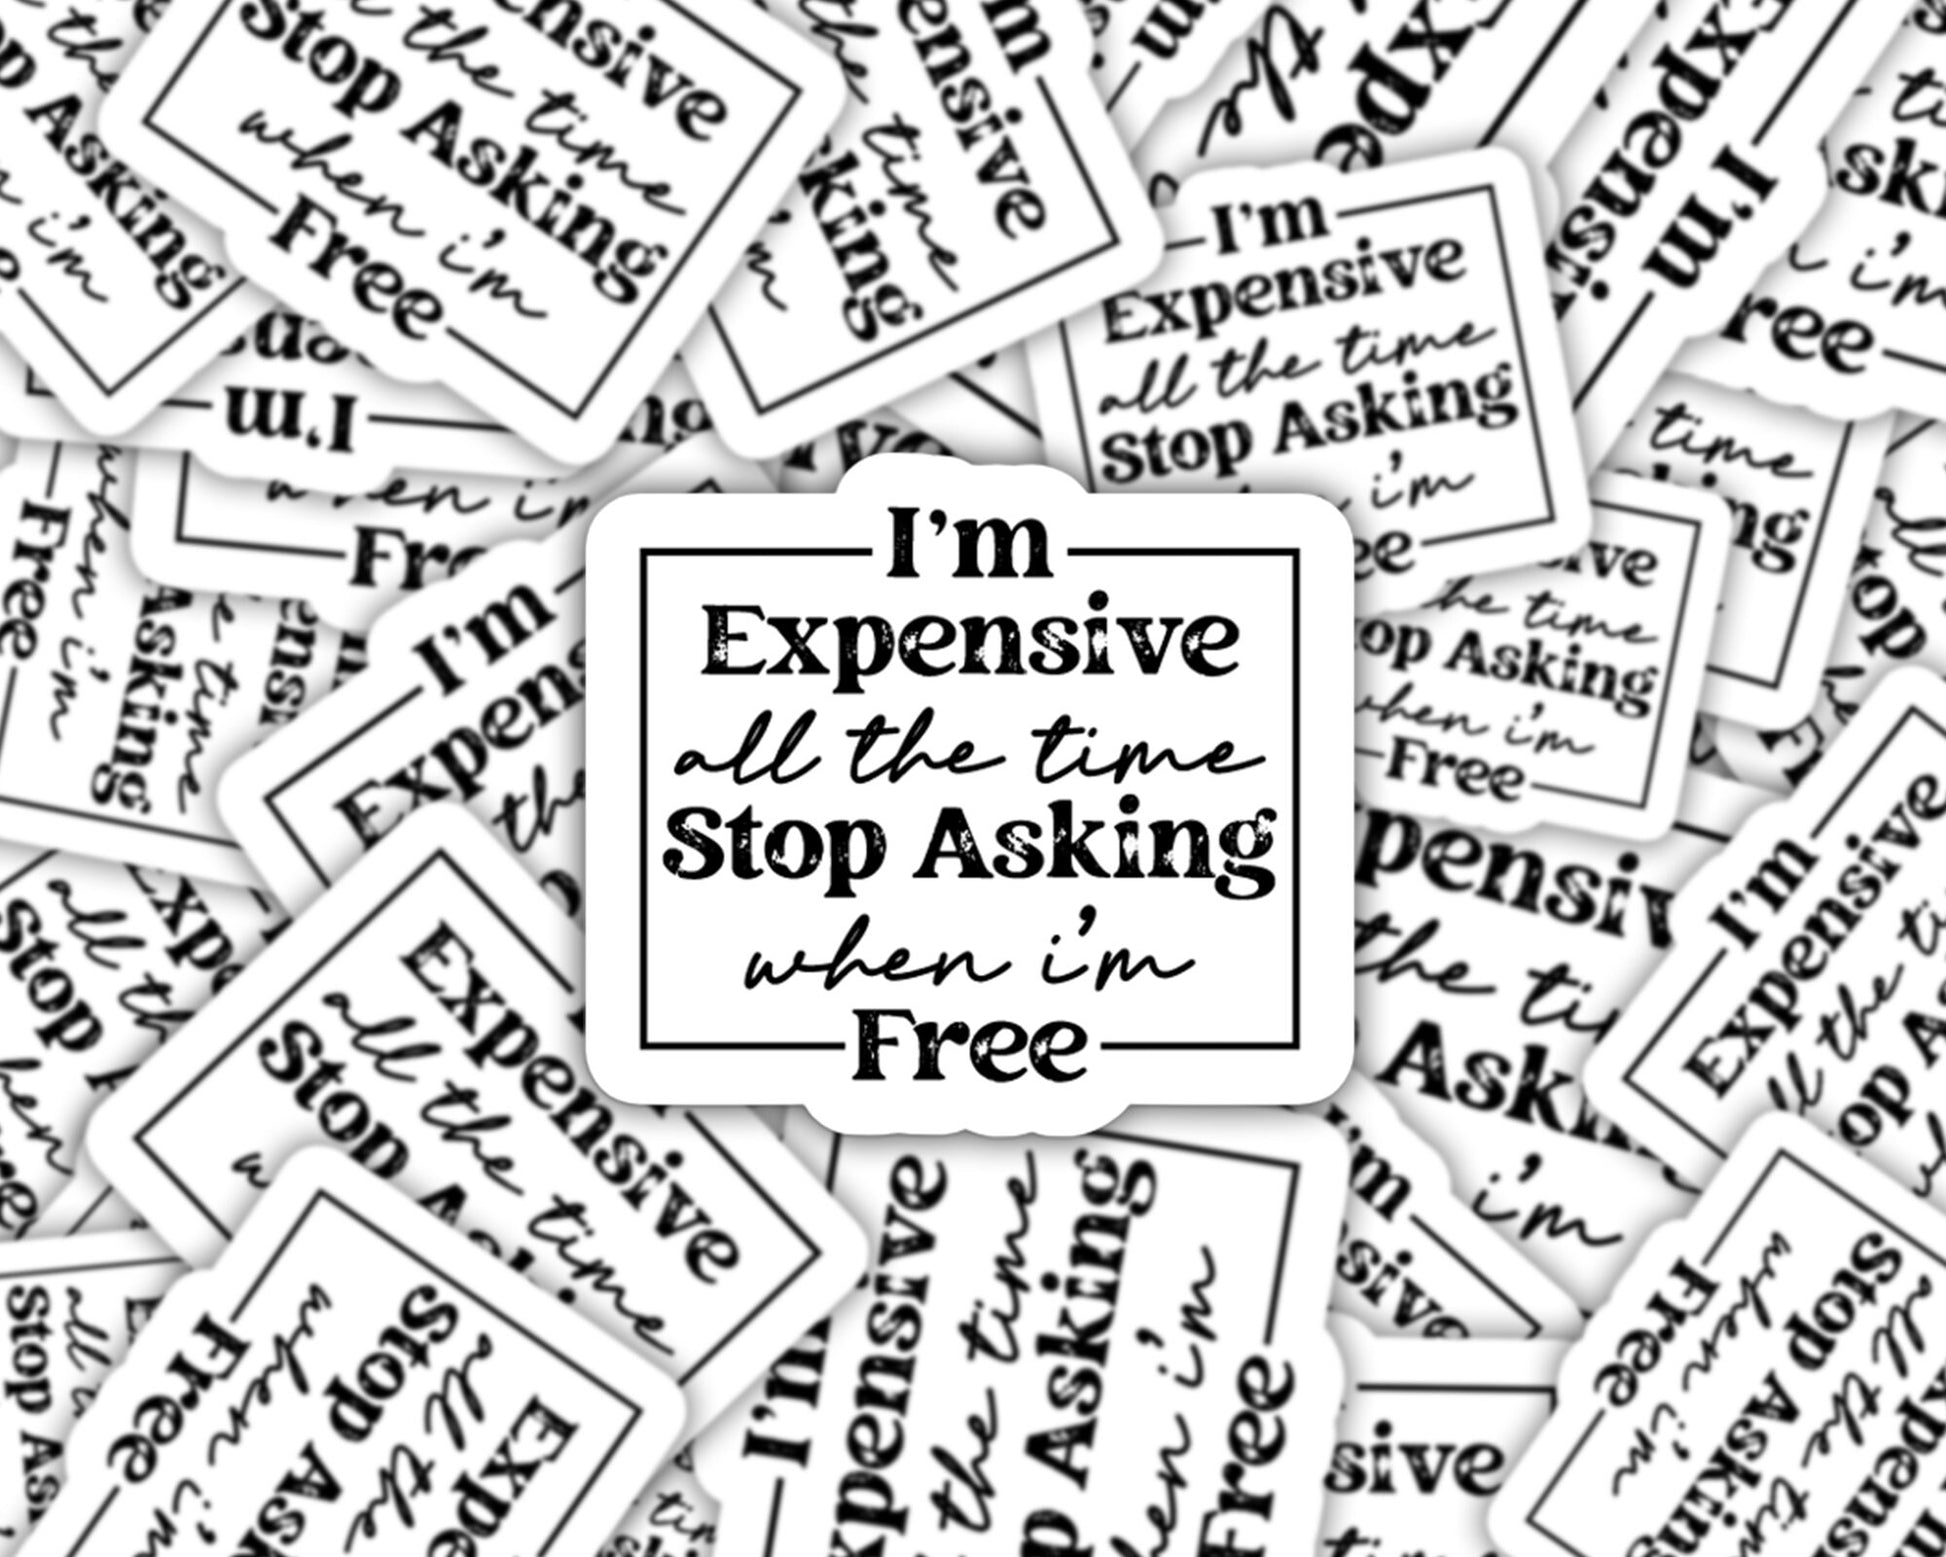 i'm expensive all the time stop asking when I'm free sticker, laptop sticker, sarcastic stickers, gifts for friend, expensive and difficult